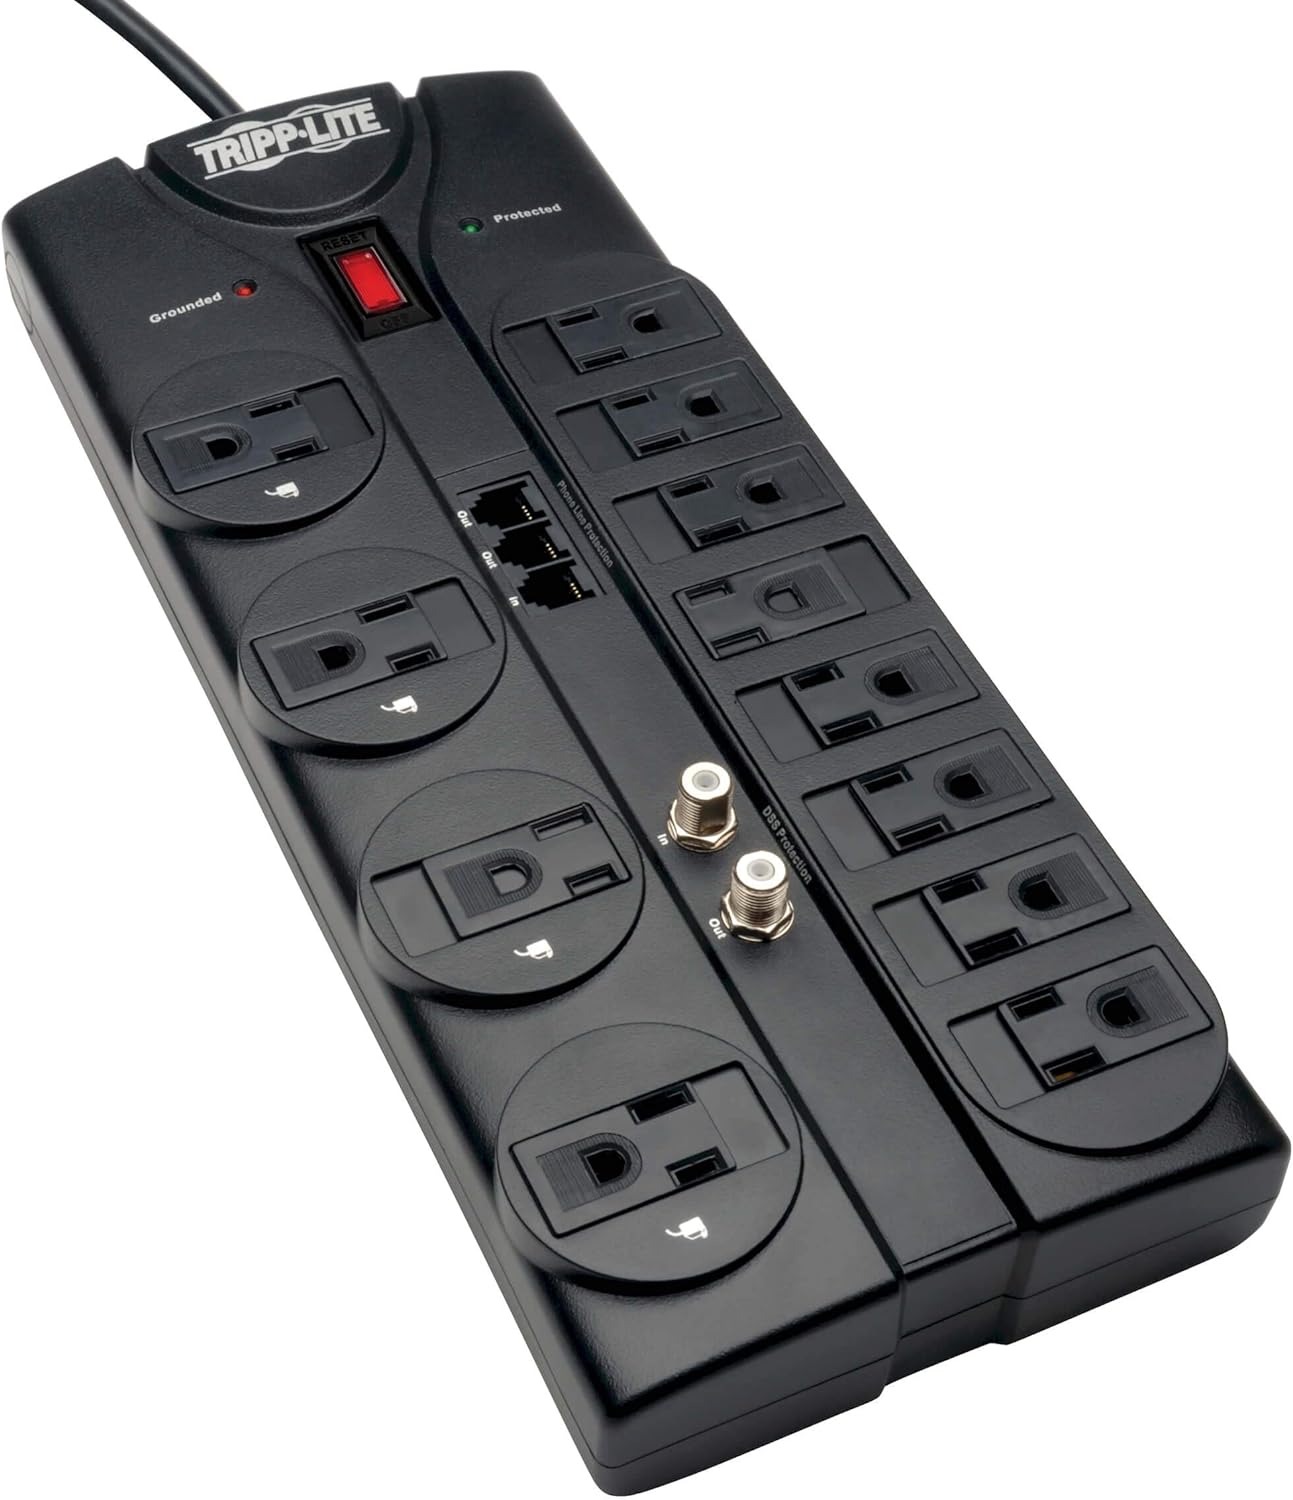 Amazon: Tripp Lite TLP1208TELTV 12 Outlet Surge Protector Power Strip, 8ft Cord, Right-Angle Plug, Tel/Modem/Coax Protection $36.99